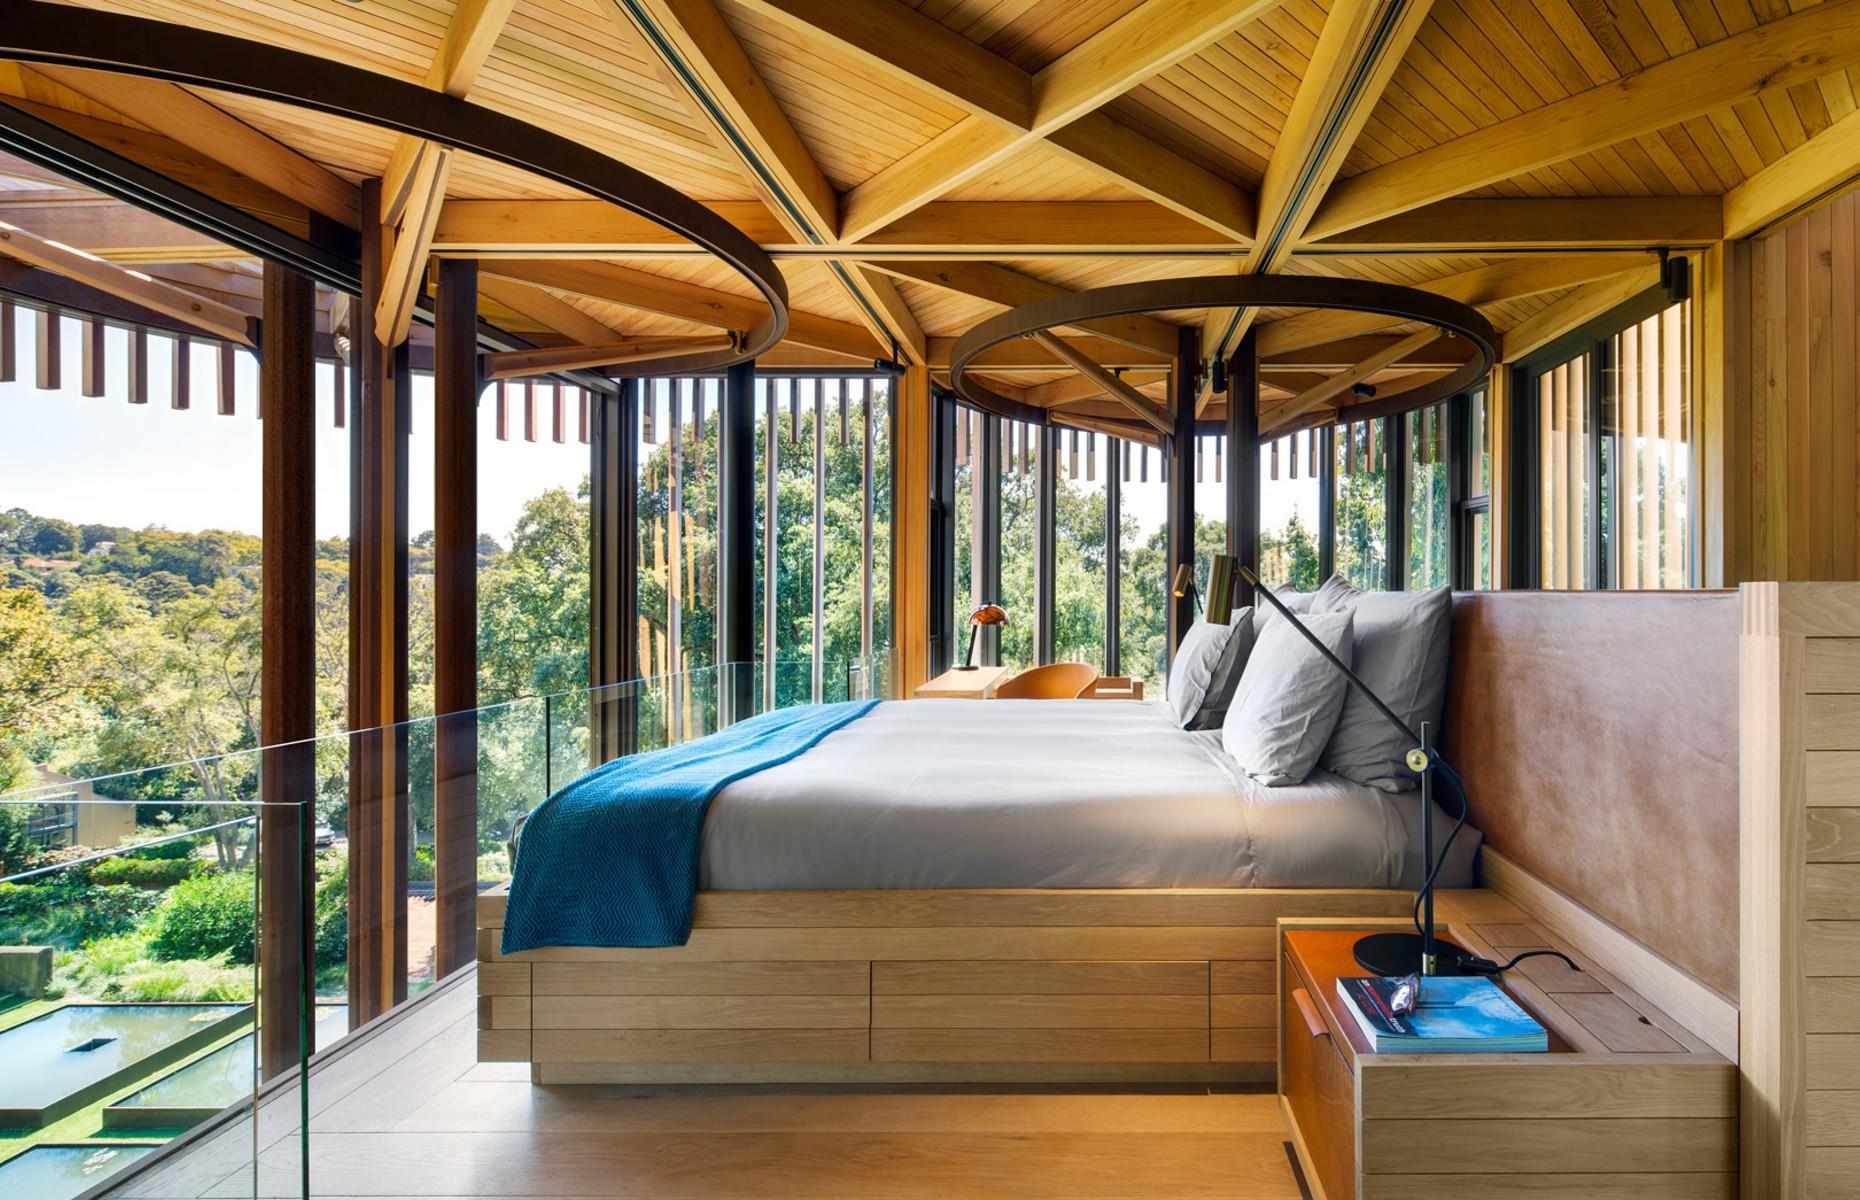 <p>Enclosed by a glass balustrade, the master bedroom can be found on a snug mezzanine level above the main living zone. Designed to double as a lookout platform, the suite boasts stunning vistas across the exterior landscape.</p>  <p>The bed frame and side table were cleverly built into the wall, creating a minimal, seamless finish that makes the most of every inch of space, while a compact but practical en suite bathroom is tucked away in a nook behind the bed.</p>